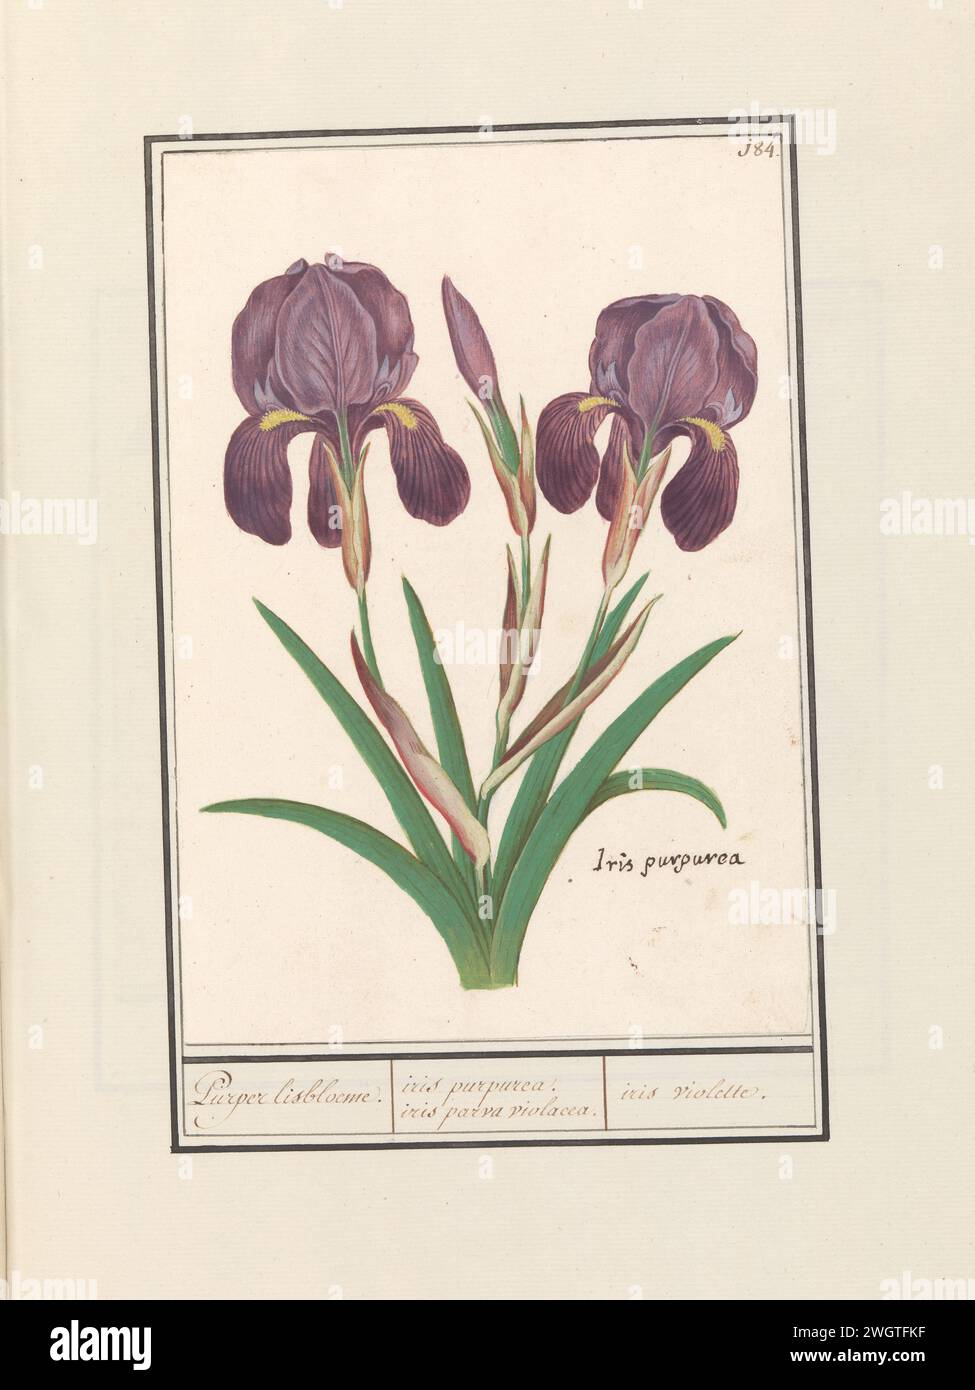 Purple Iris (Iris Germanica), Anselmus Boëtius de Boodt, 1596 - 1610 drawing Purple iris. Numbered at the top right: 184. Bottom right the Latin name. Part of the second album with drawings of flowers and plants. Ninth of twelve albums with drawings of animals, birds and plants known around 1600, made commissioned by Emperor Rudolf II. With explanation in Dutch, Latin and French. draughtsman: Praagdraughtsman: Delft paper. watercolor (paint). deck paint. chalk. ink brush / pen flowers: iris Stock Photo